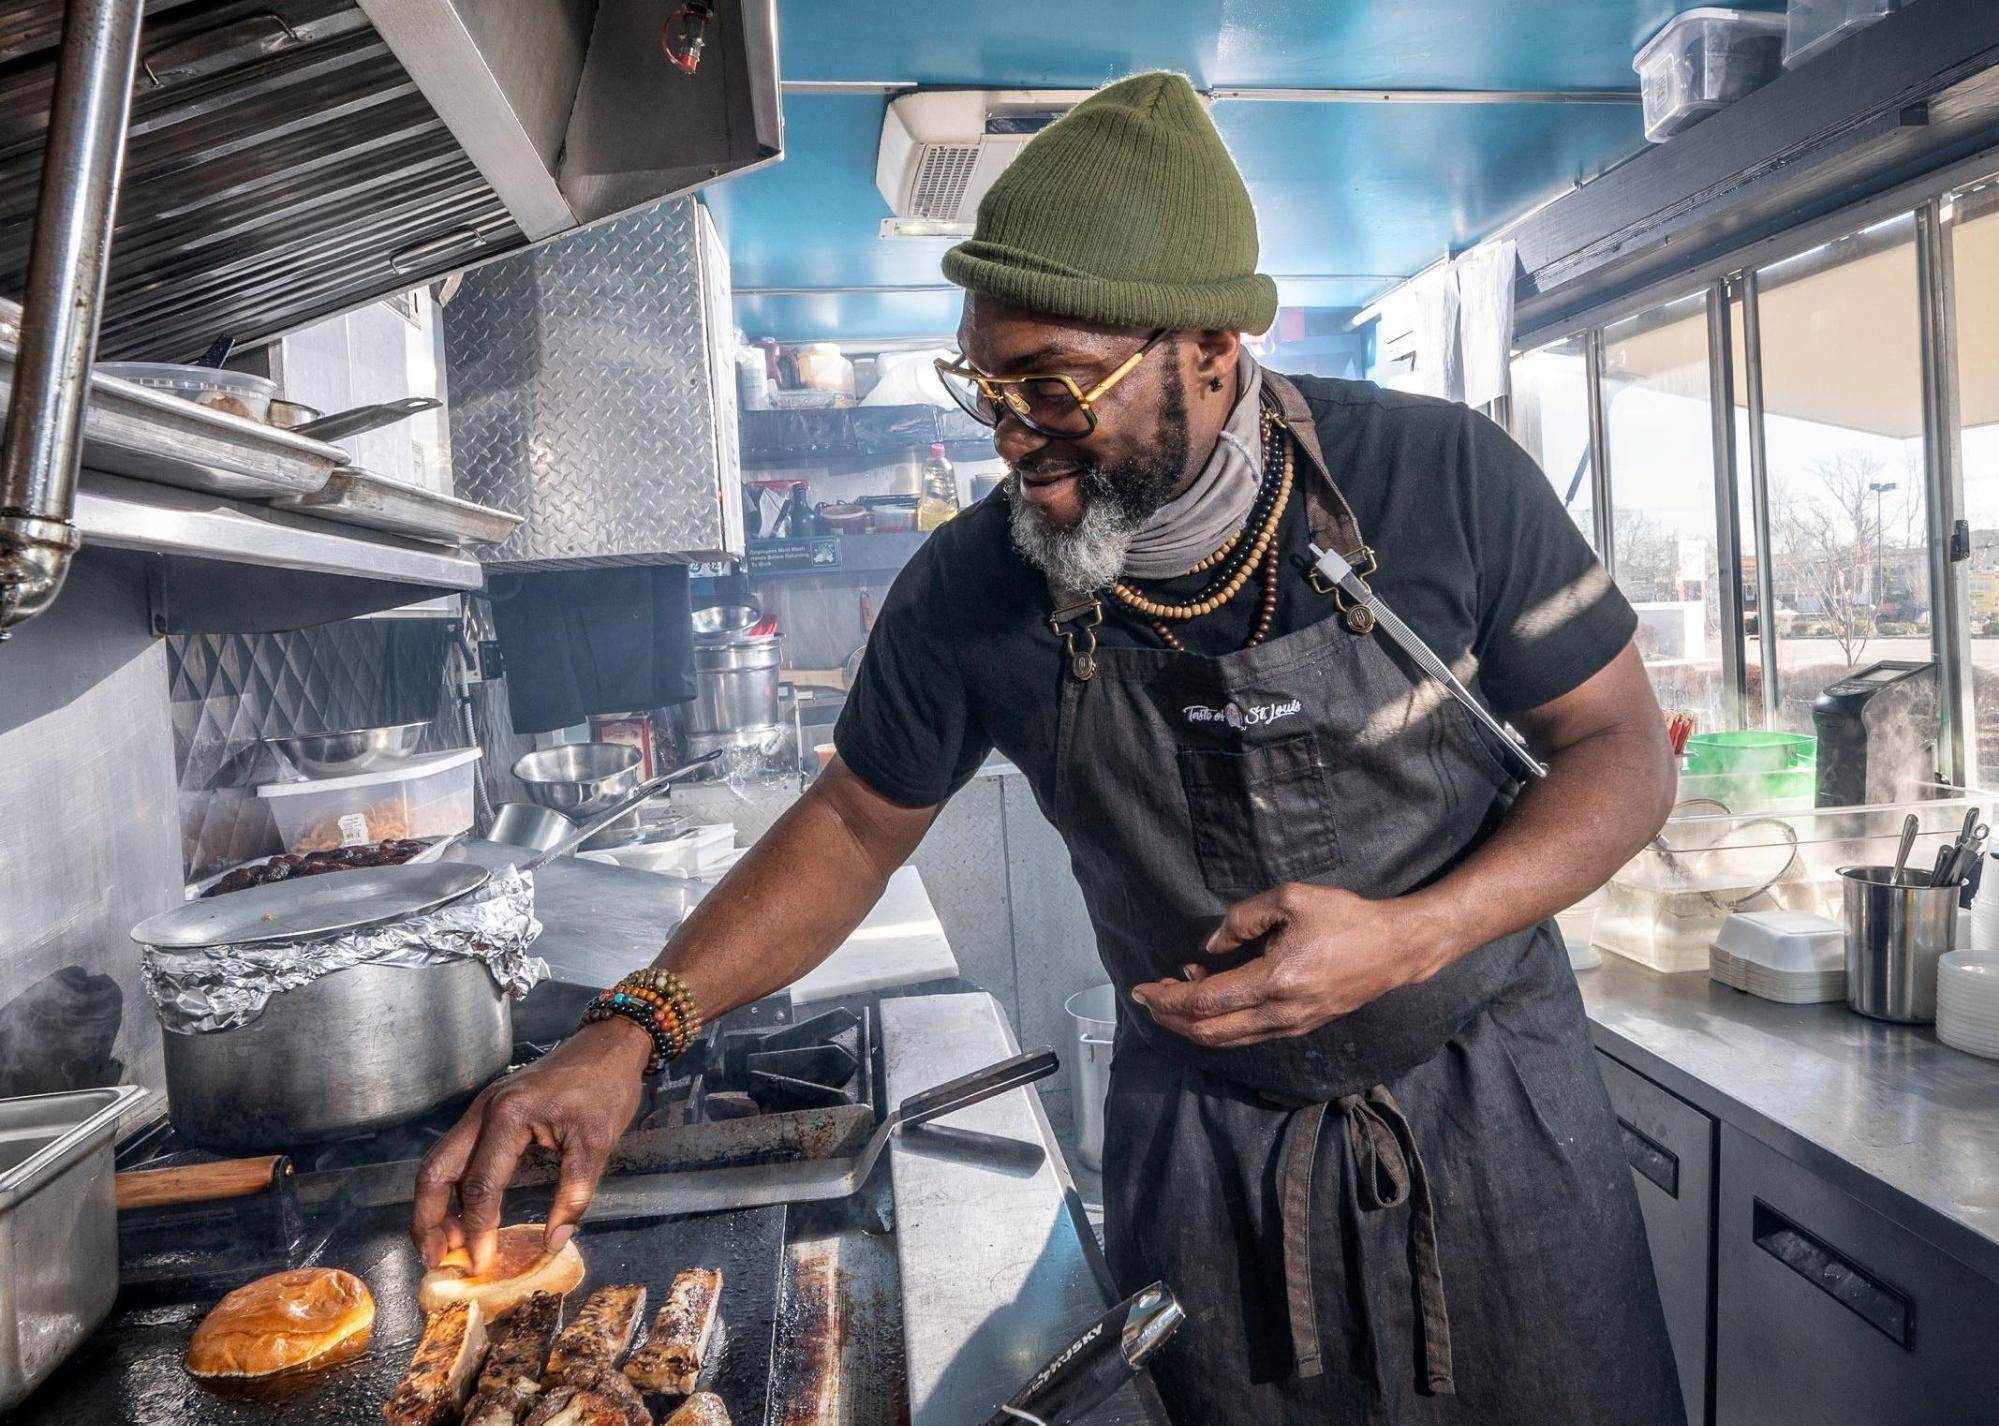 3 most common SBA loans: a man cooks food on a stove